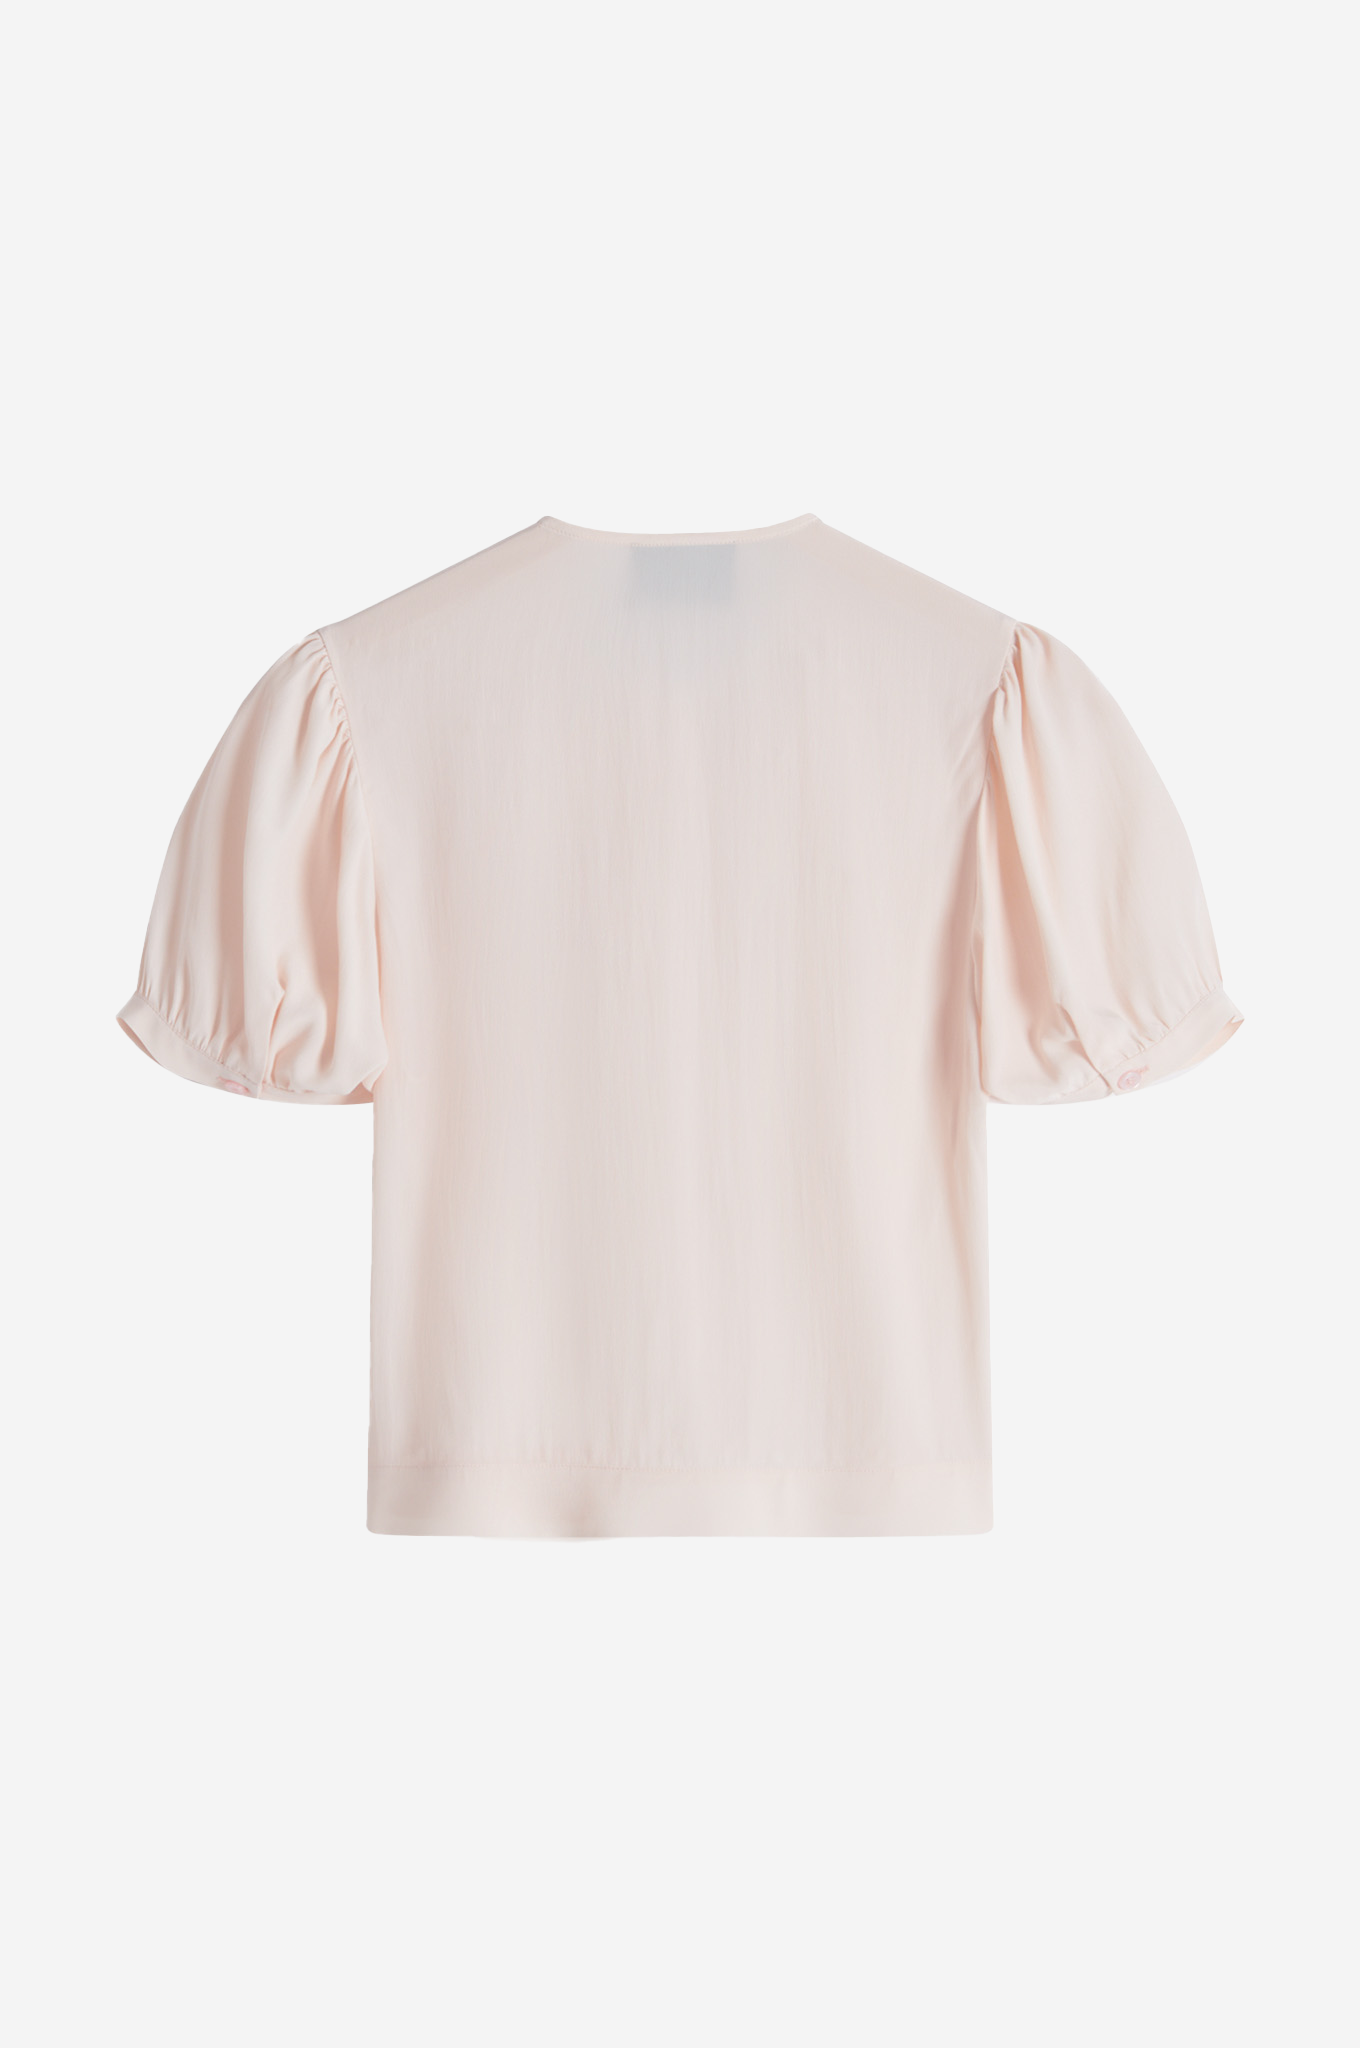 Clustered Rose Button Top